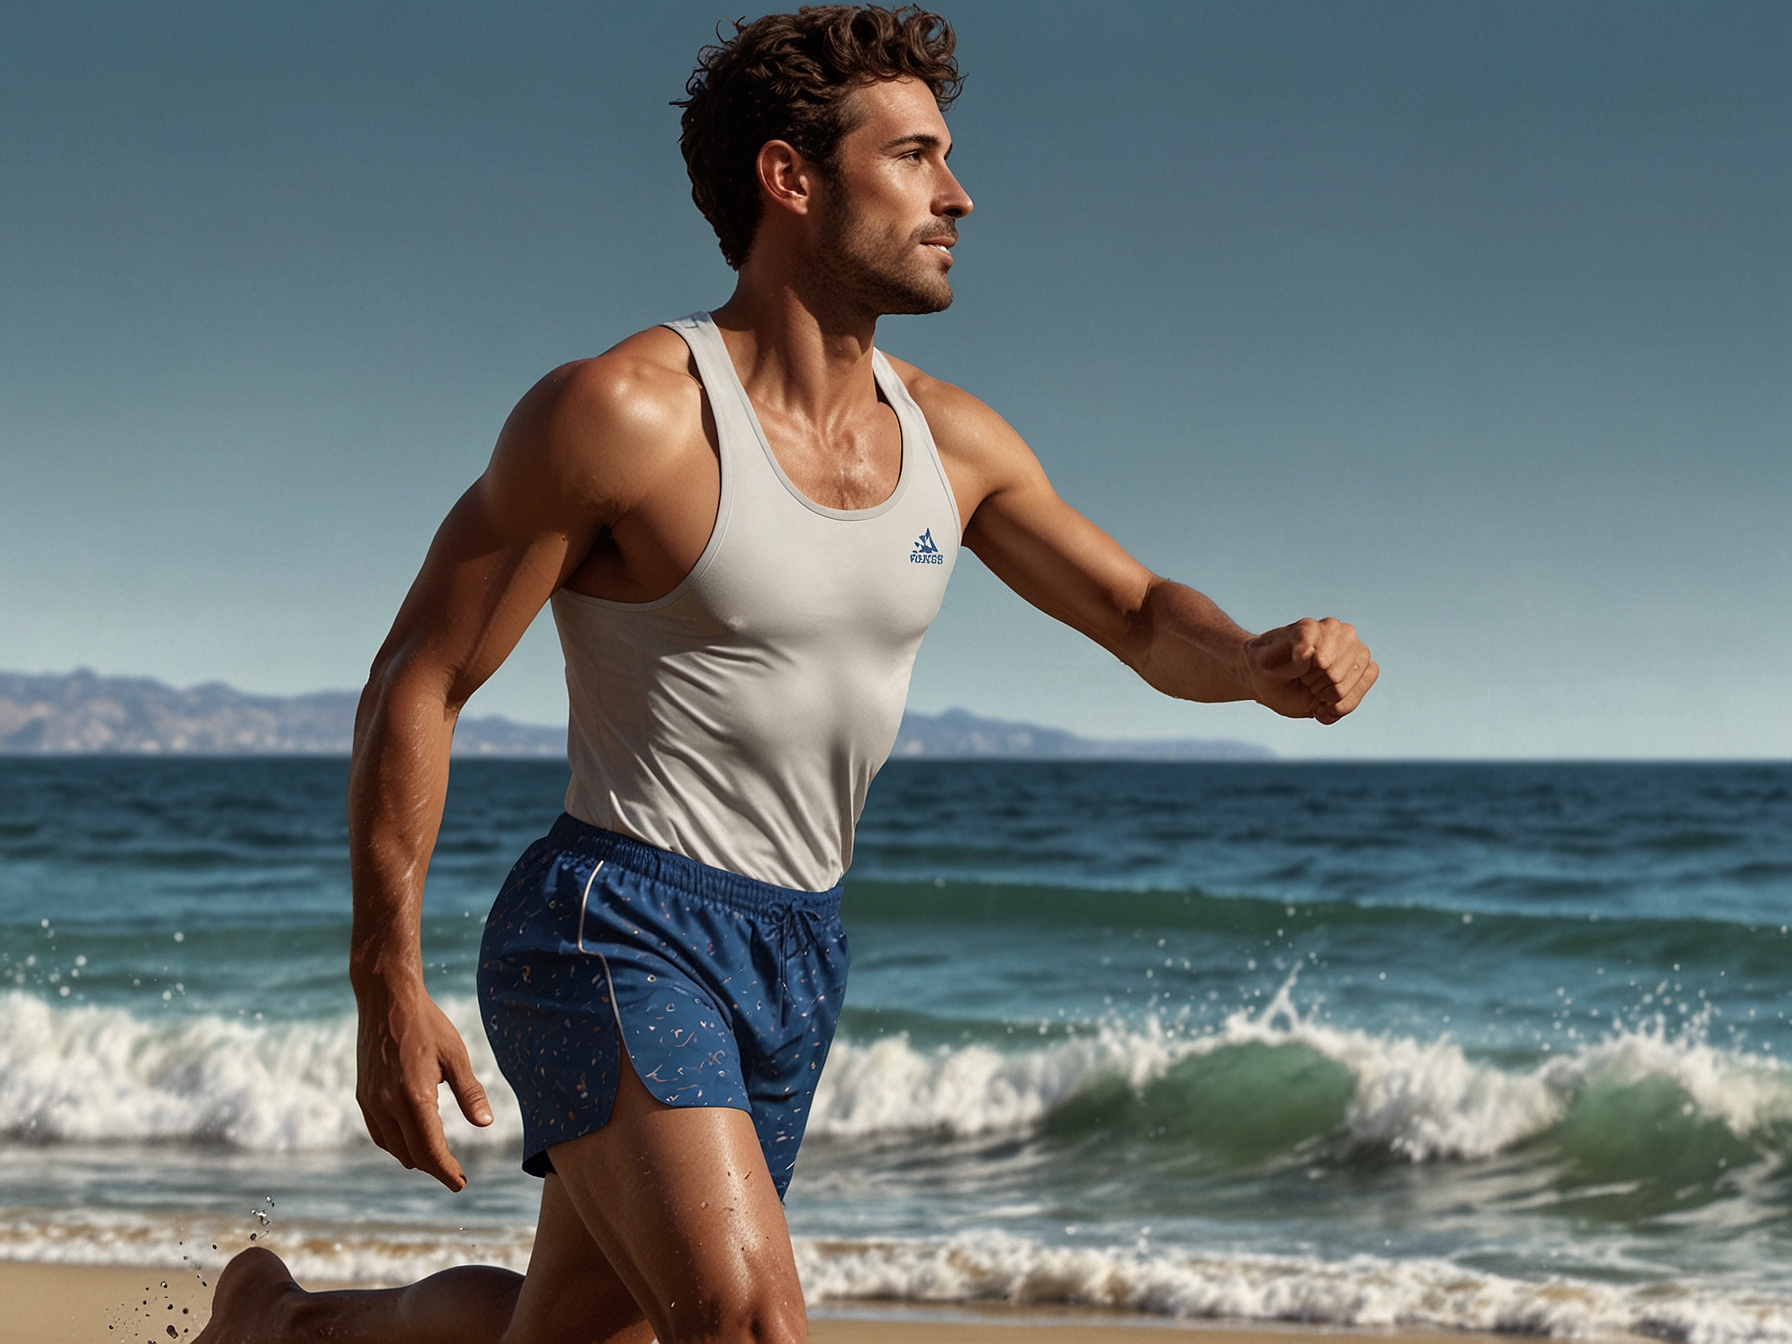 A dynamic runner-surfer showcasing the Run Cannonball Run Shorts, designed for both running and swimming with quick-drying, stretchable Italian fabric inspired by Olympic swimsuits.